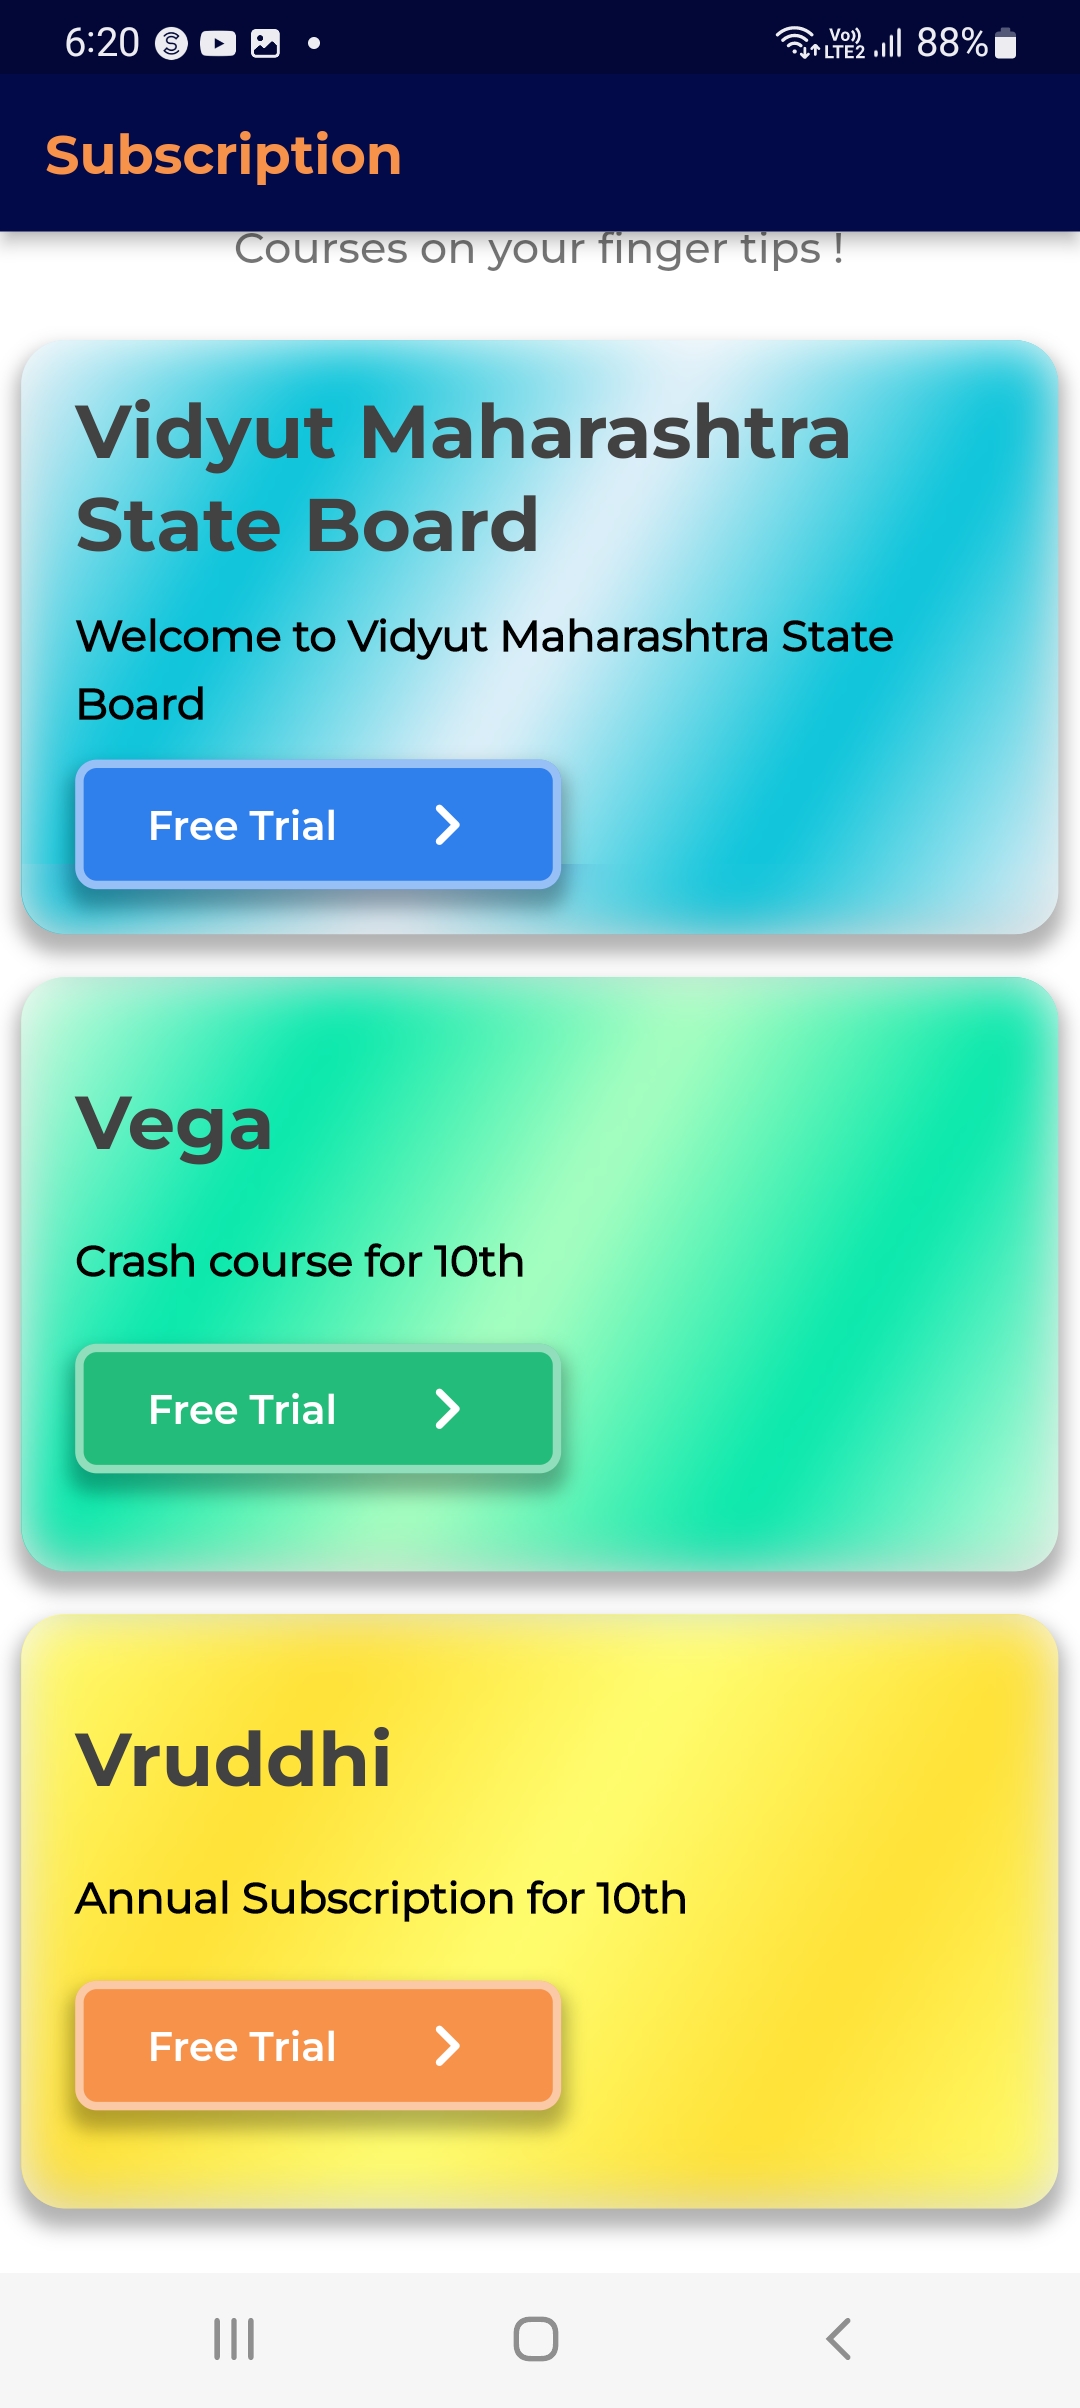 SIN X- JL RIERA |

Subscription

   

ourses on your finger tips’!

Vidyut Maharashtra
State Board

Welcome to Vidyut Maharashtra State
Board

Free Trial >

 

Vega

Crash course for 10th

Vruddhi

Annual Subscription for 10th